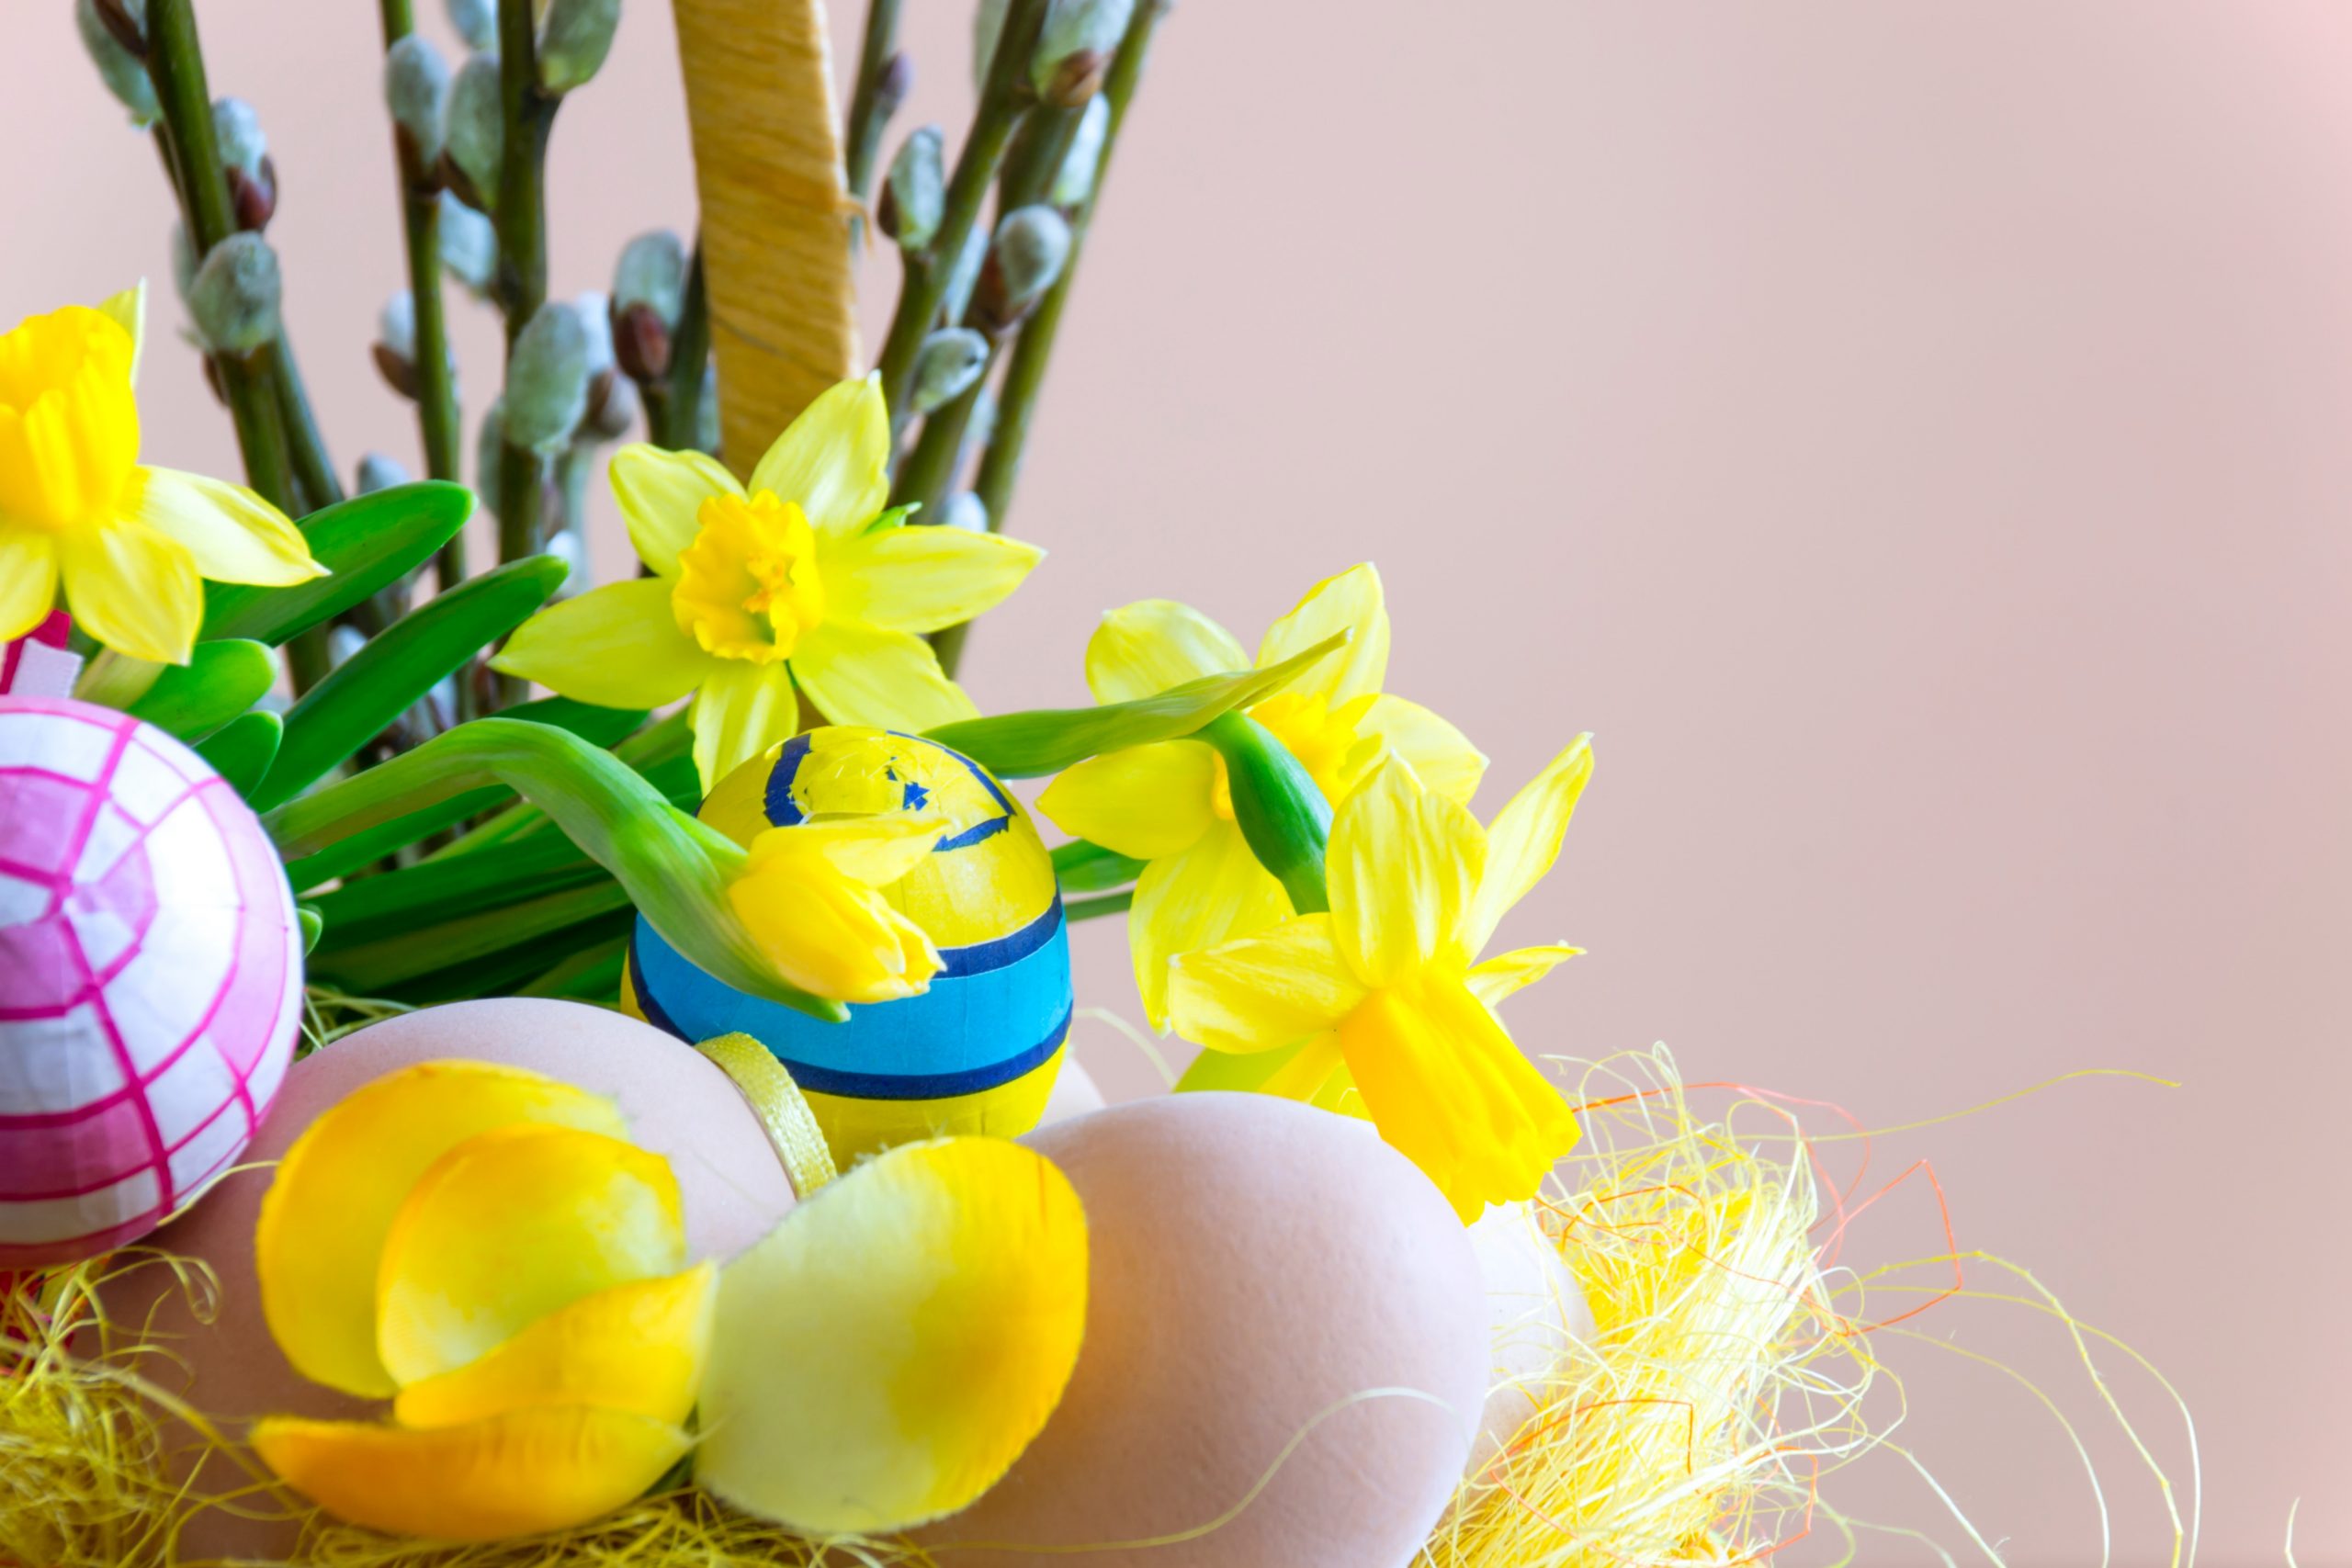 5 Easter Traditions from Around the World